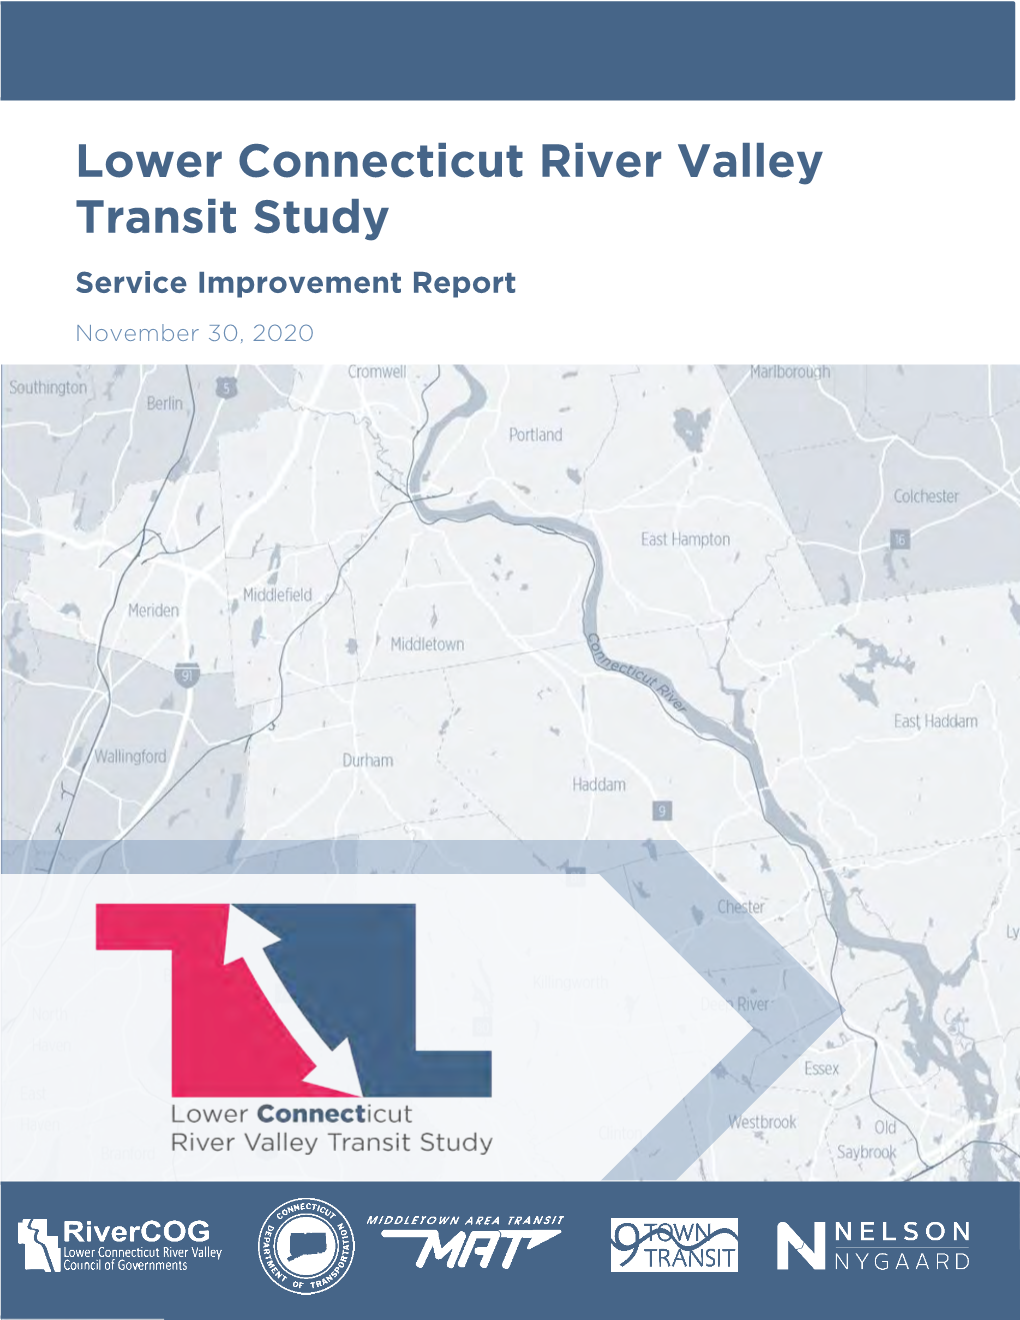 Lower Connecticut River Valley Transit Study Service Improvement Report November 30, 2020